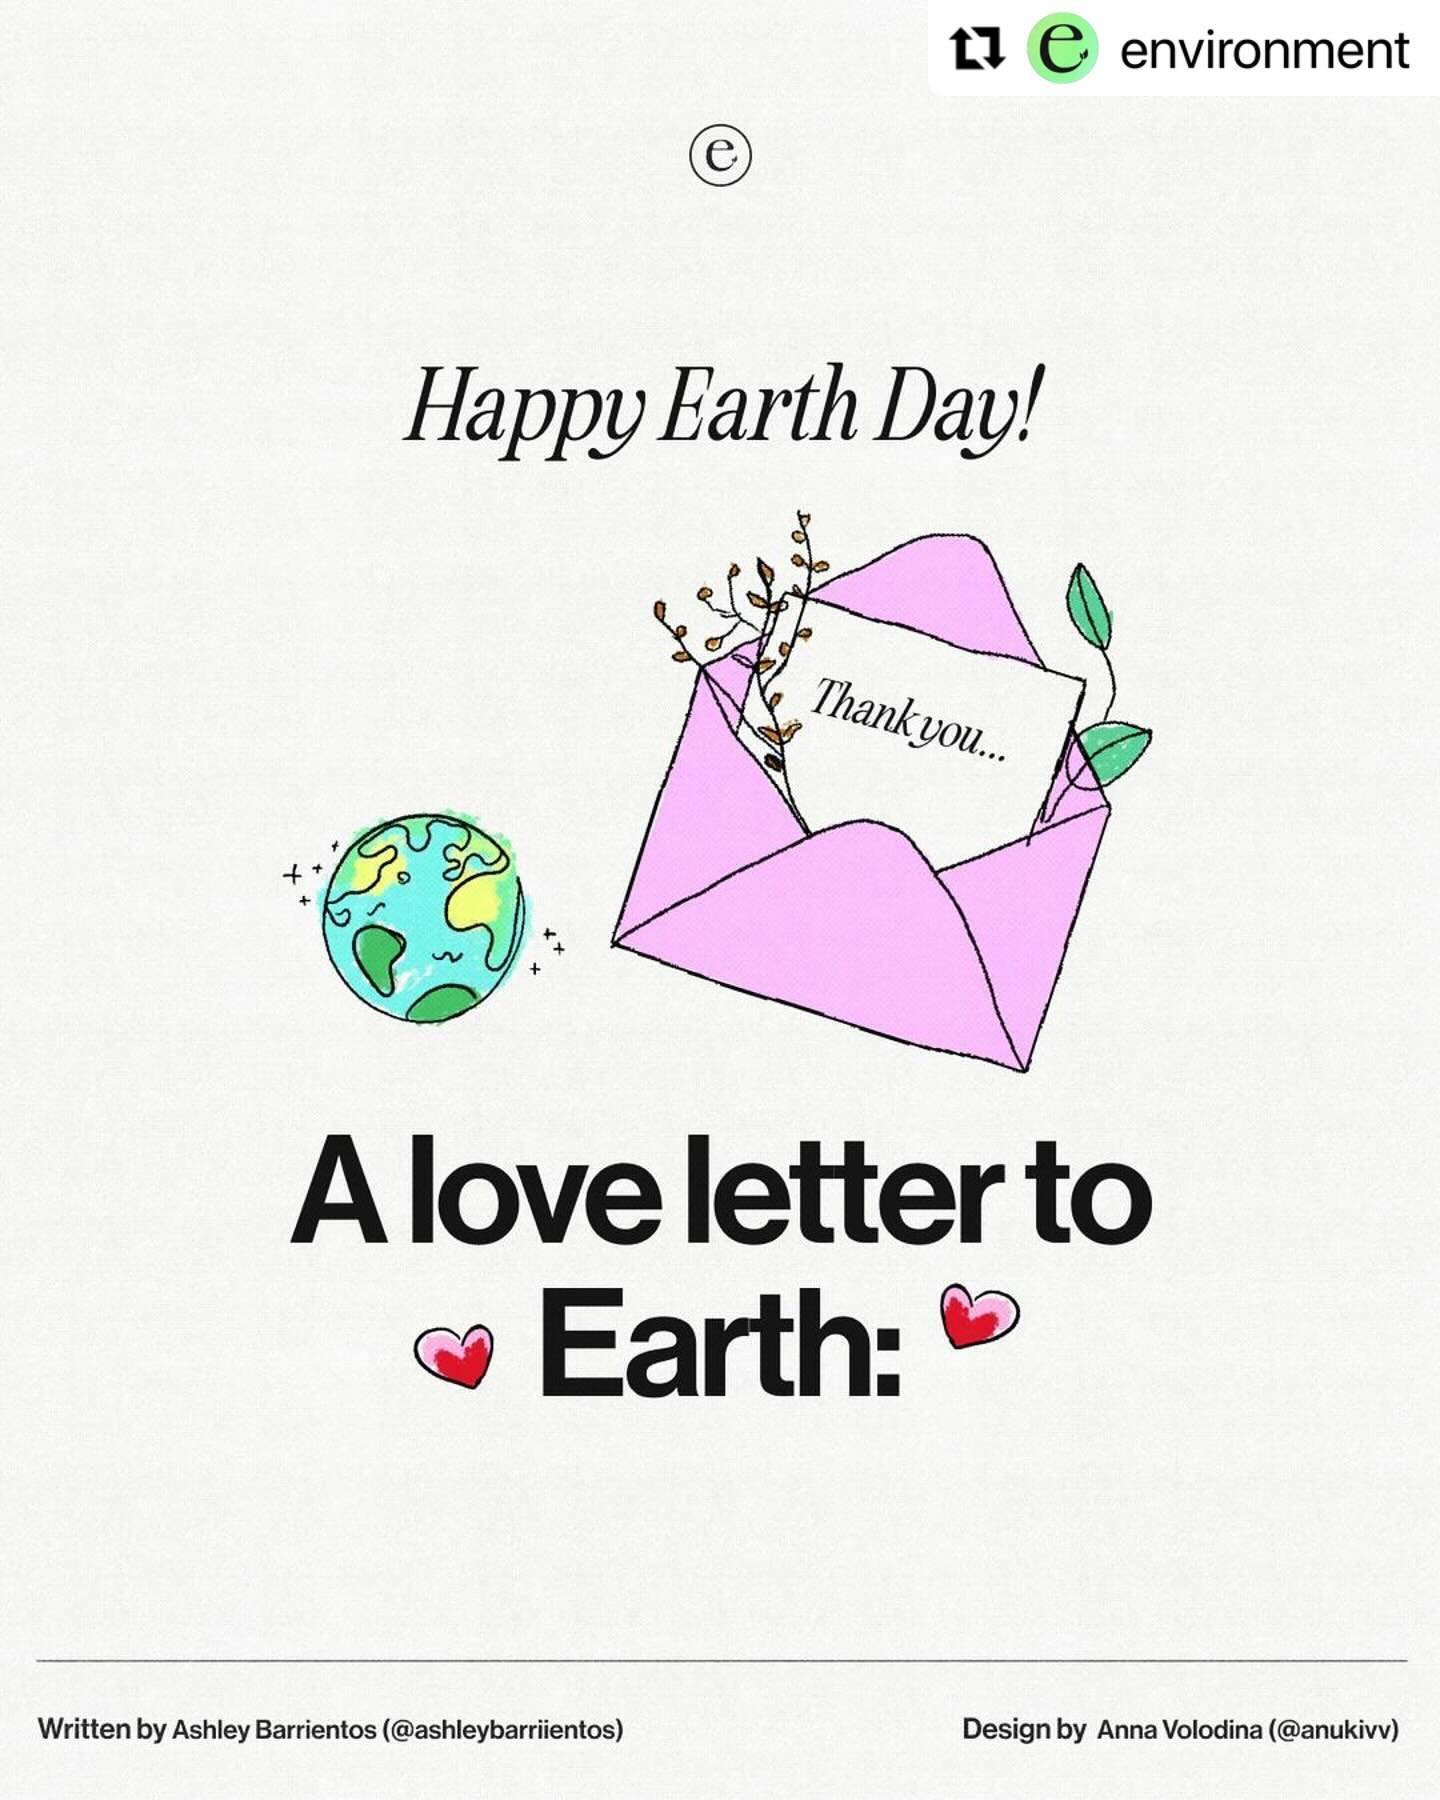 💌🌍🌱📍

#Repost @environment 
・・・
Dear Earth&hellip;. 💌🌍

Are you celebrating Earth Day? Let us know what you&rsquo;re grateful for in the comments!👇

#earthday #earth #mothernature #nature #motherearth #love #grateful #gratitude